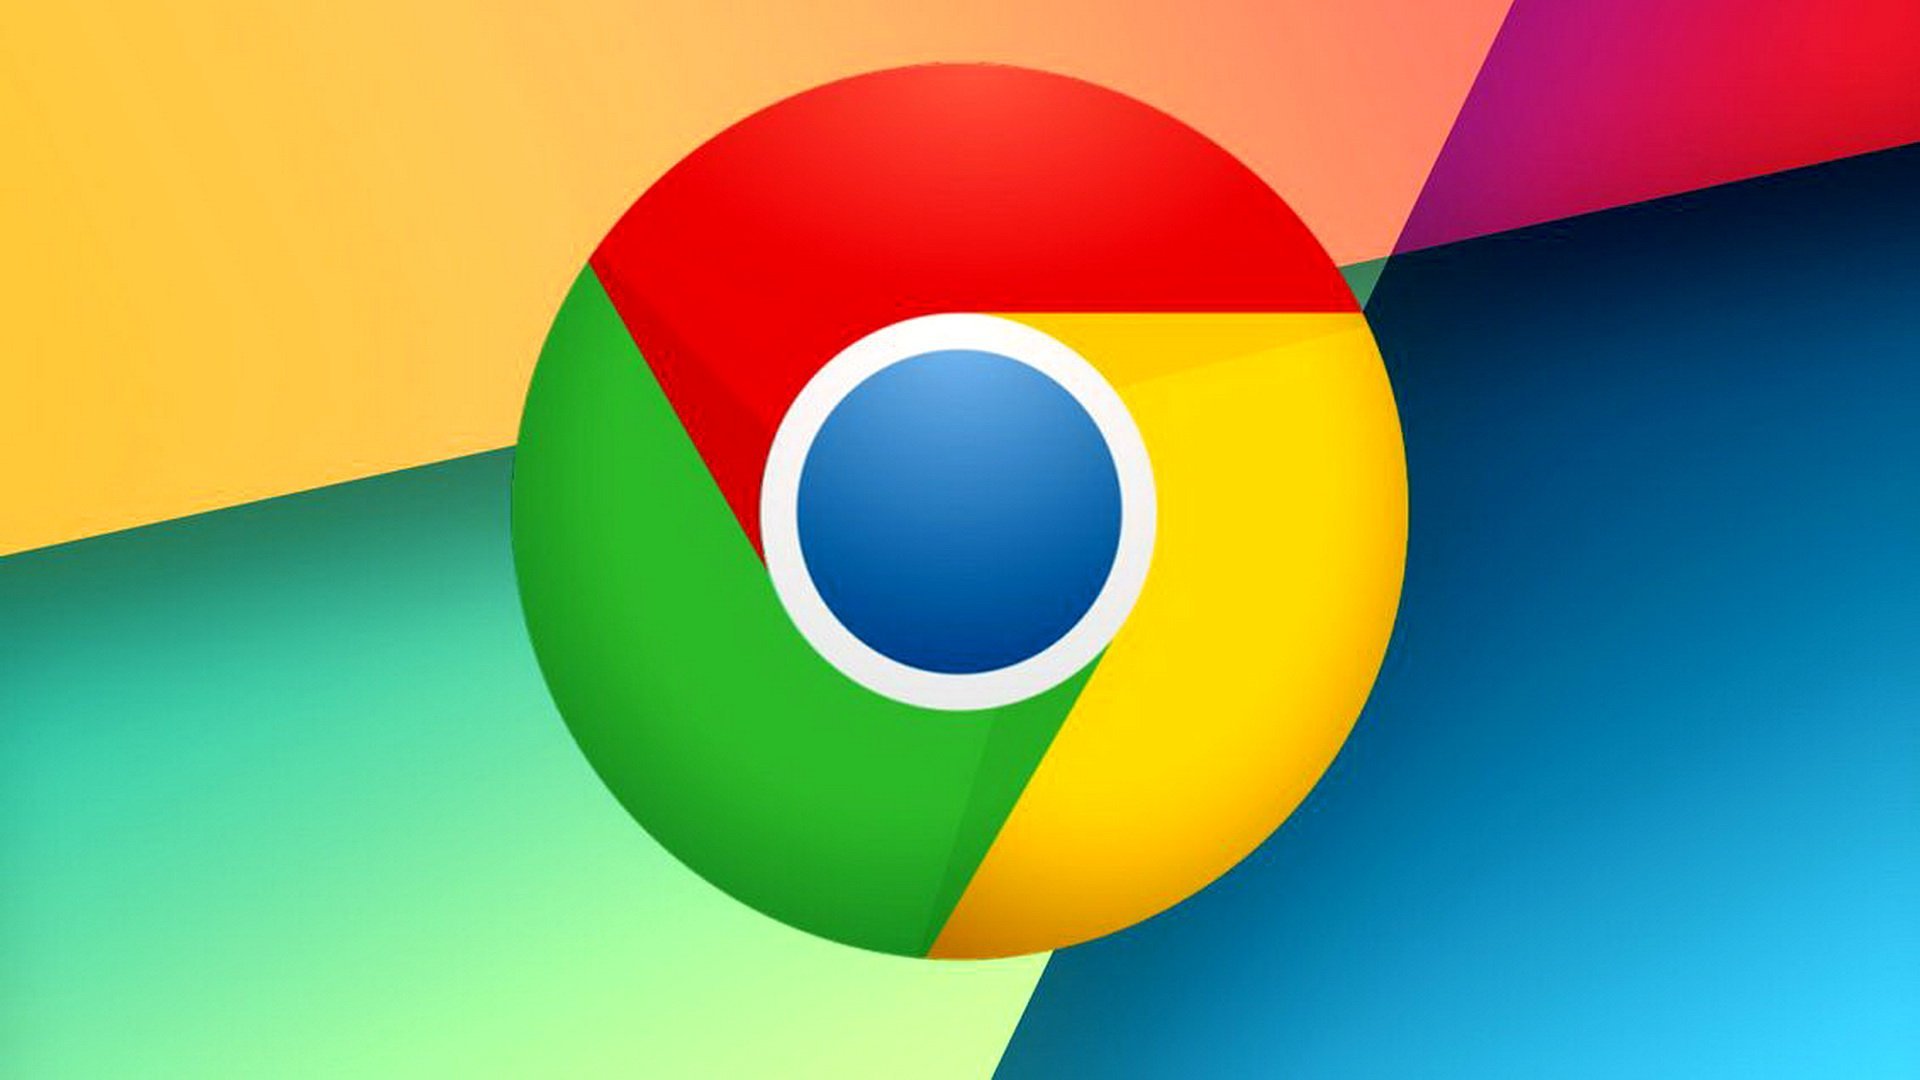 The beta version of the Chrome browser has received several convenient features